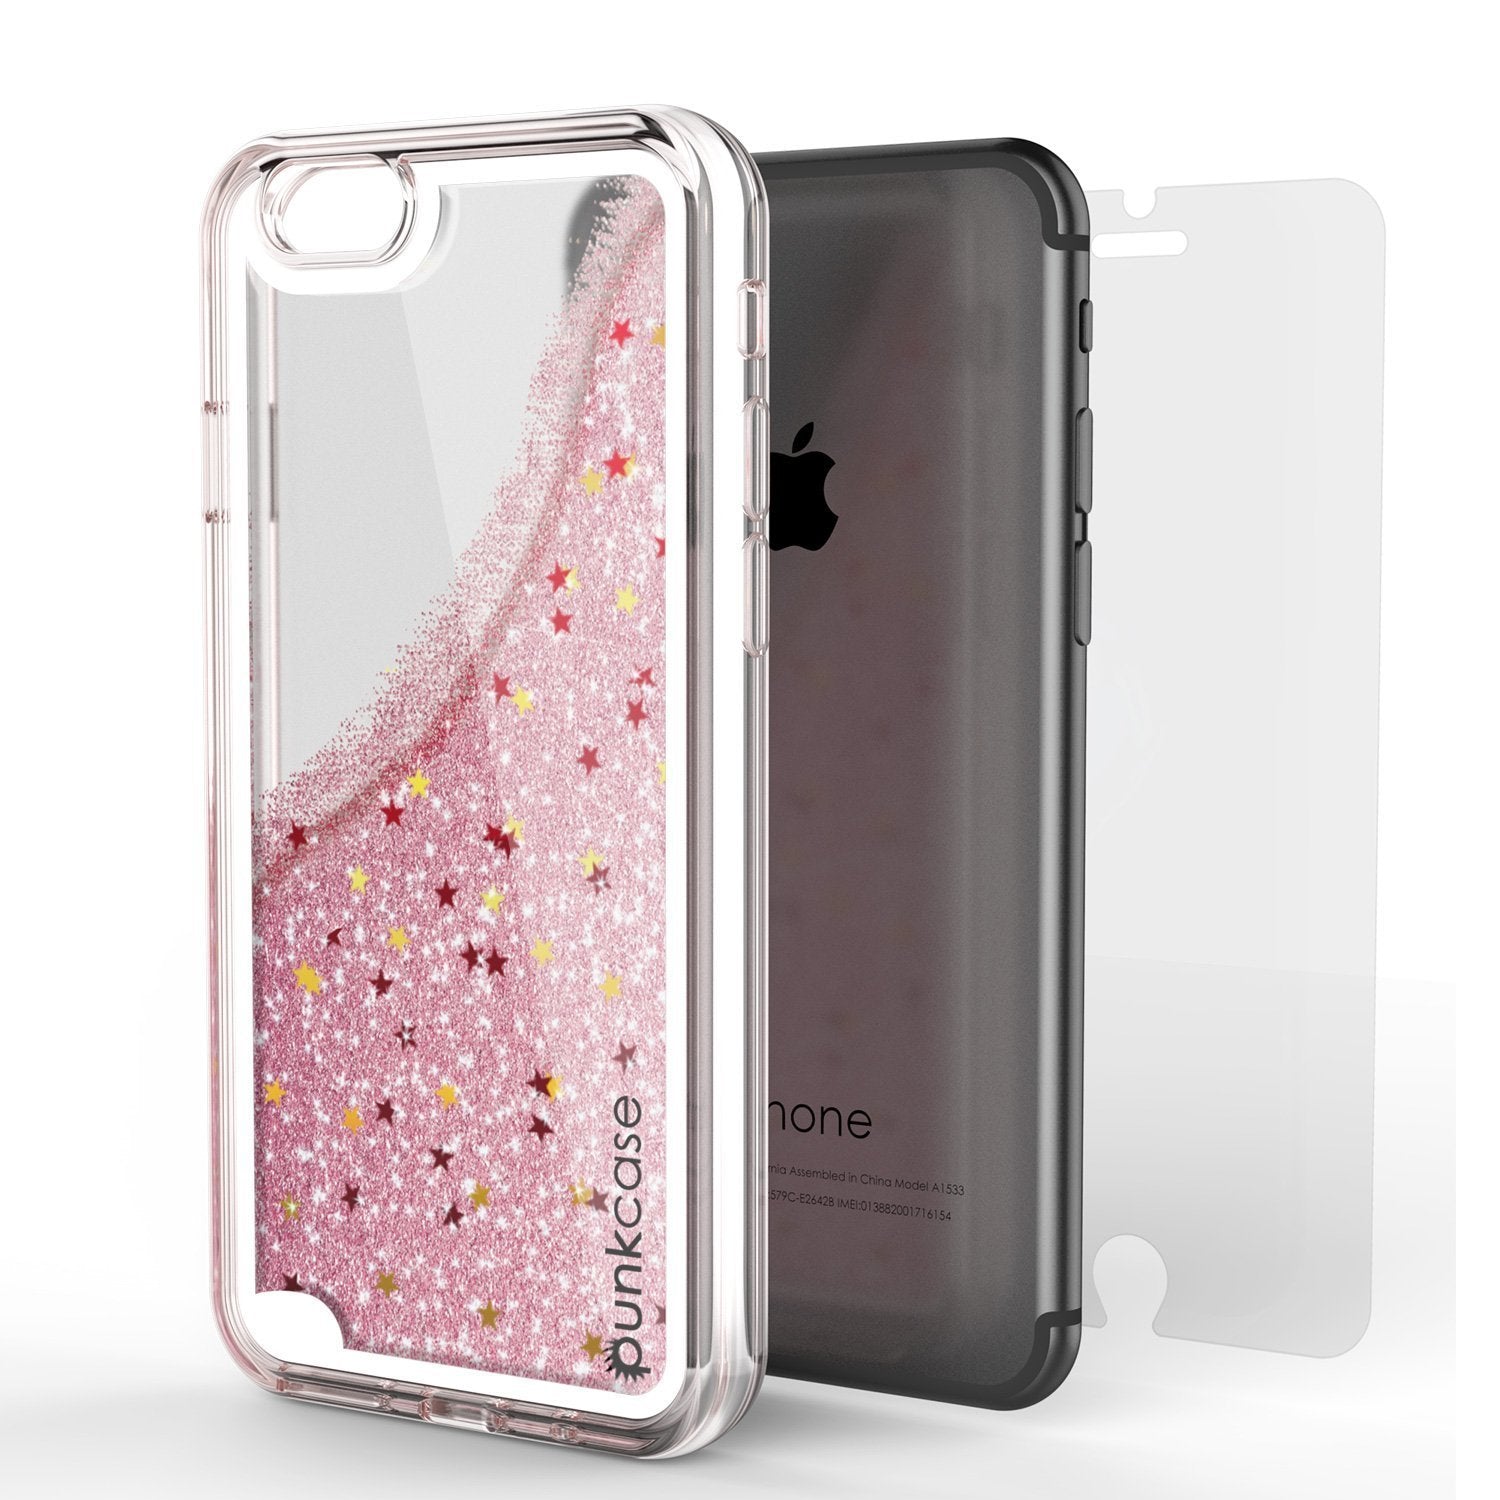 iPhone SE (4.7") Case, PunkCase LIQUID Rose Series, Protective Dual Layer Floating Glitter Cover